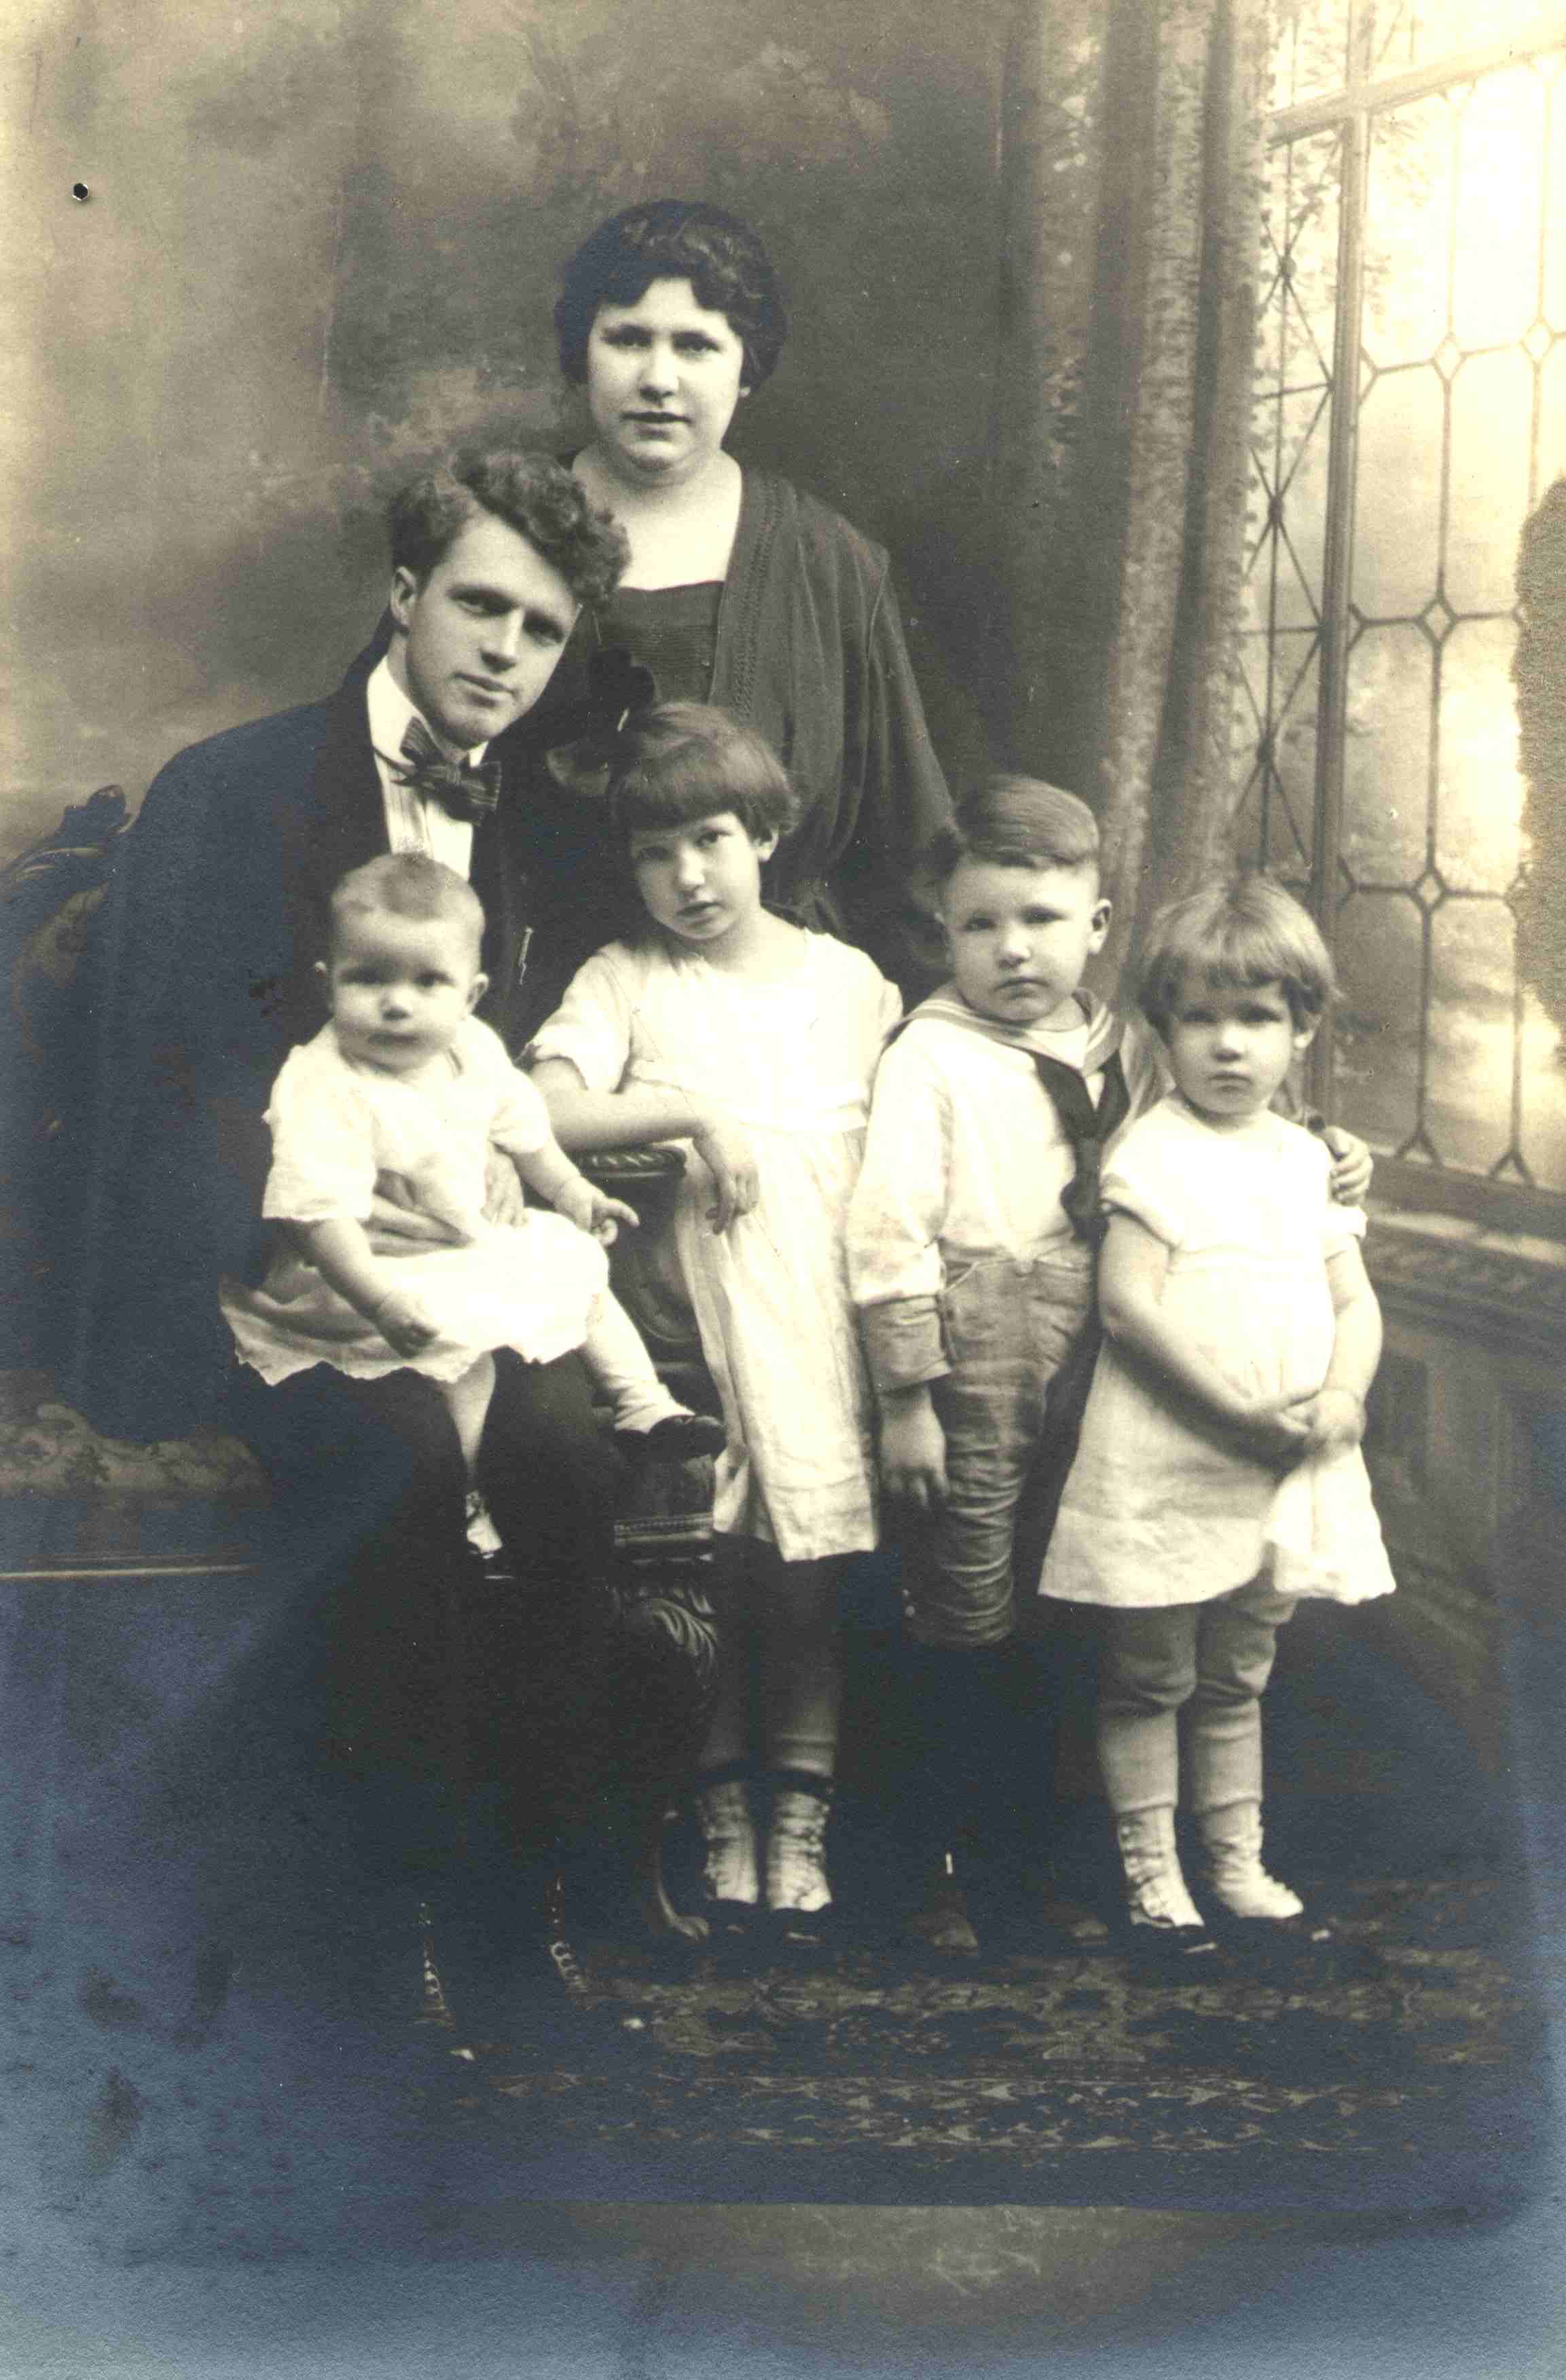 Bernard Hoffman, his wife Eva and Family.  Children are Eunice, Bernard Jr., Ruth and Jerome.  Mary was not born yet.